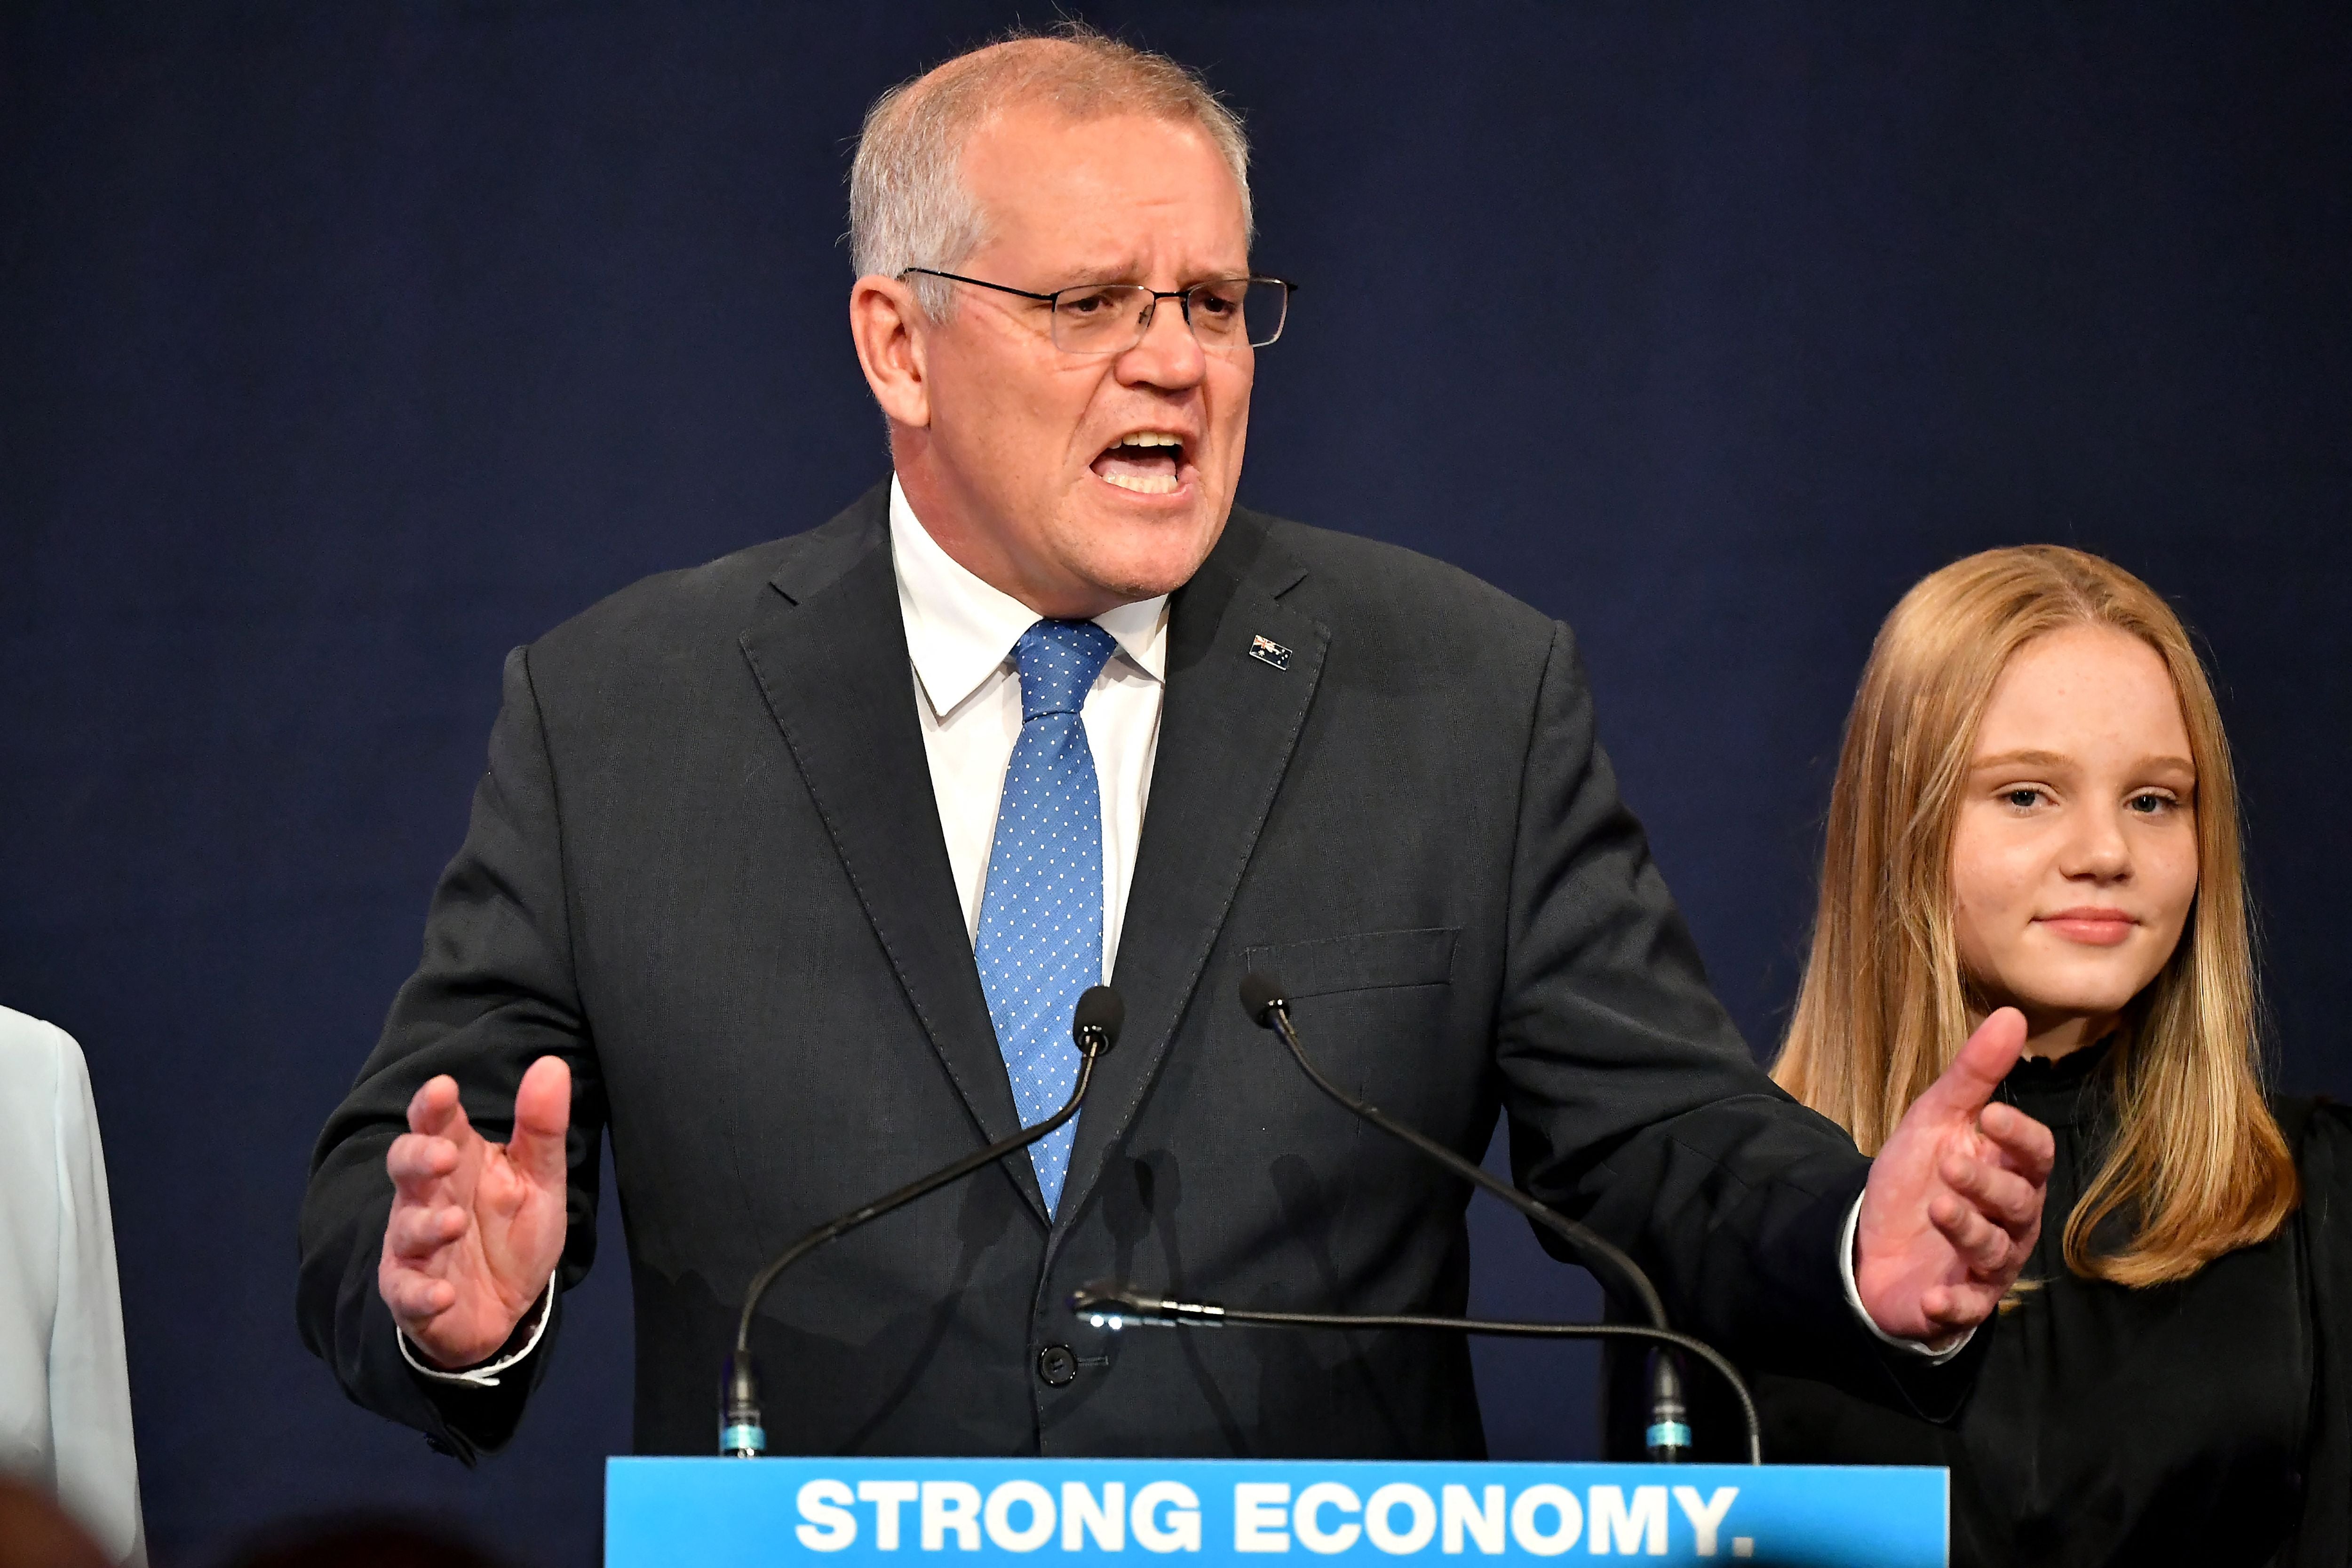 File: Australia’s prime minister Scott Morrison speaks beside his daughter at a Liberal election night after the Australian general election in Sydney on 21 May 2022